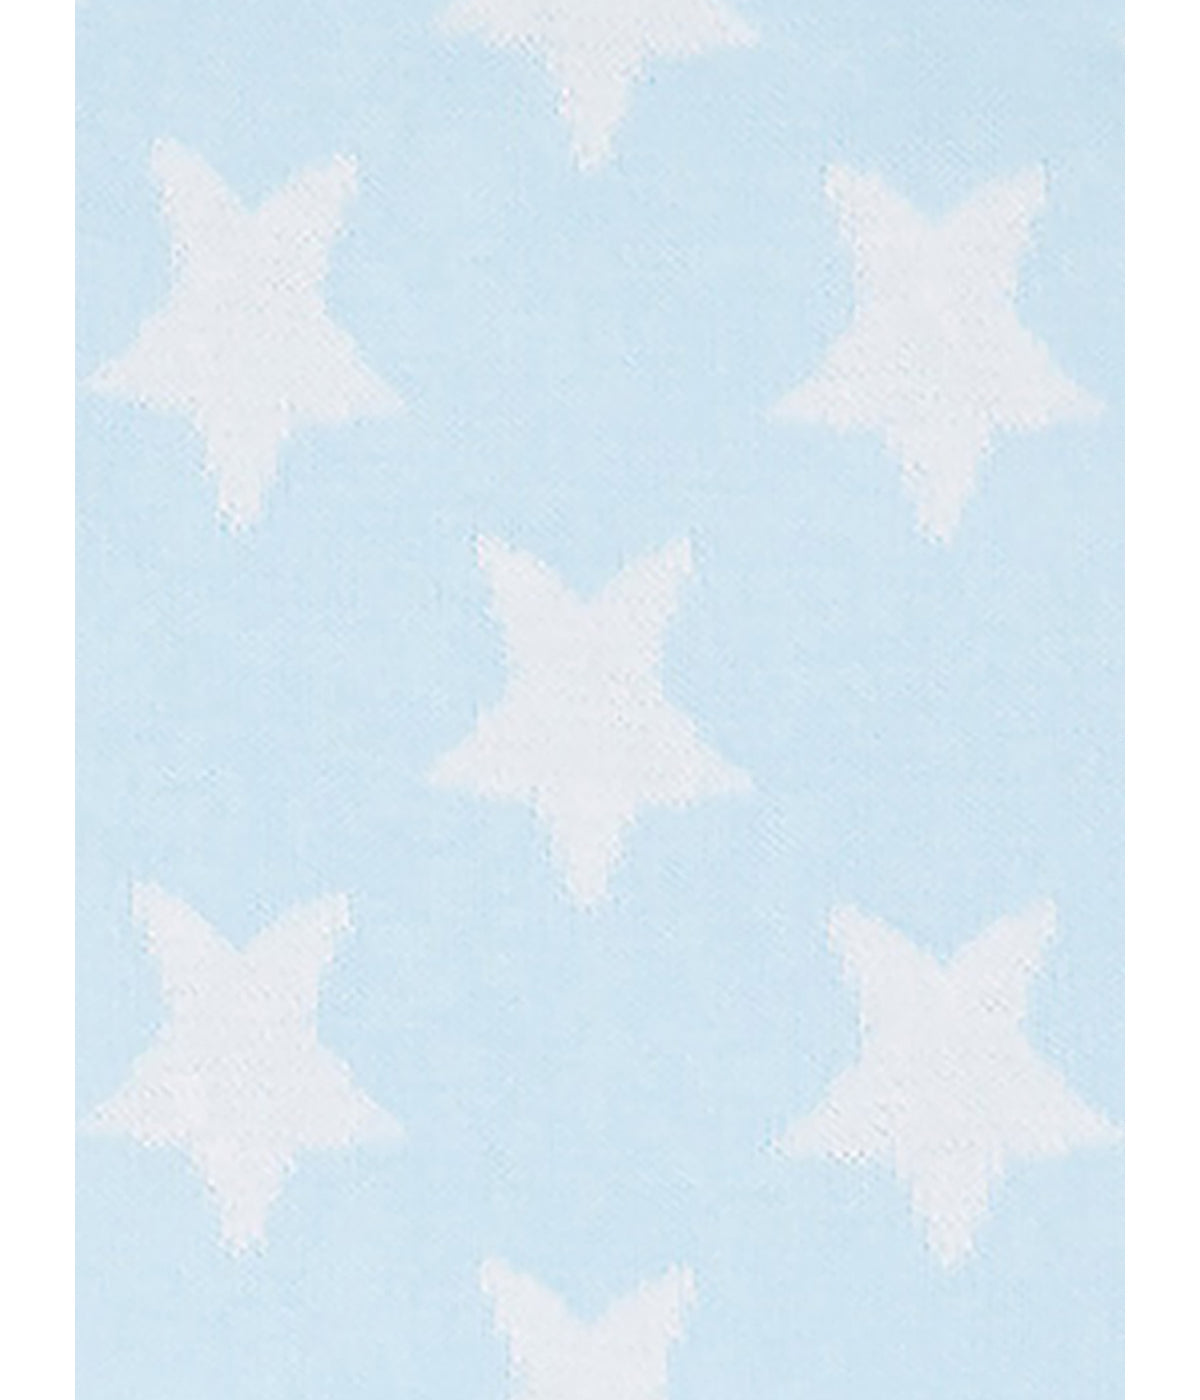 Baby Boys and Baby Girls Knitted Cotton Stars Baby Blanket Blue and White